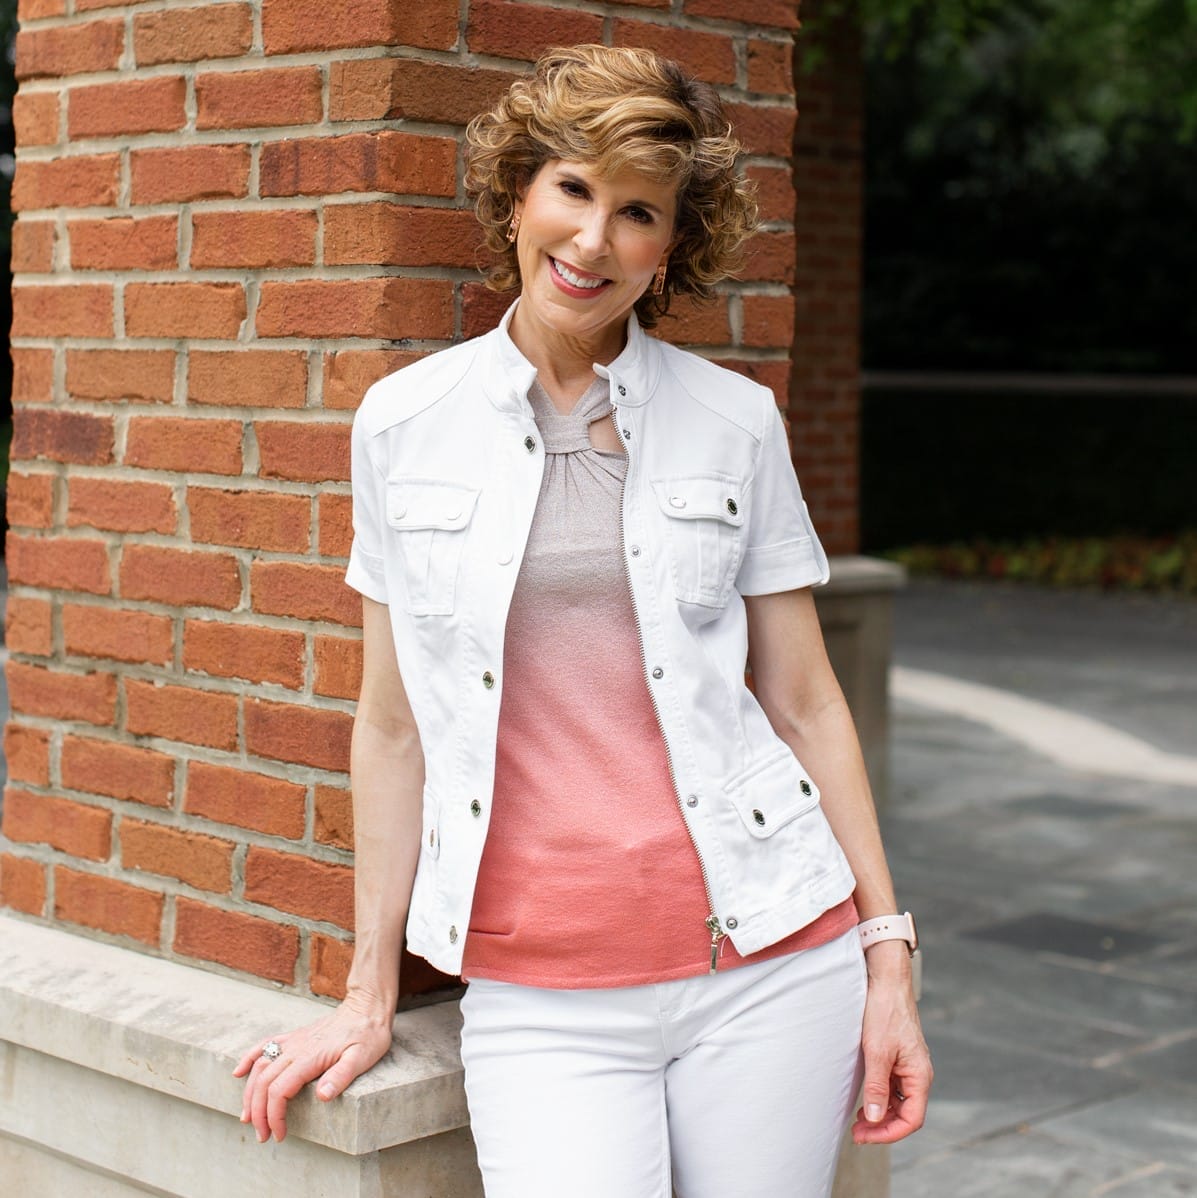 woman leaning against brick pillar wearing ombre top and white short sleeve jacket